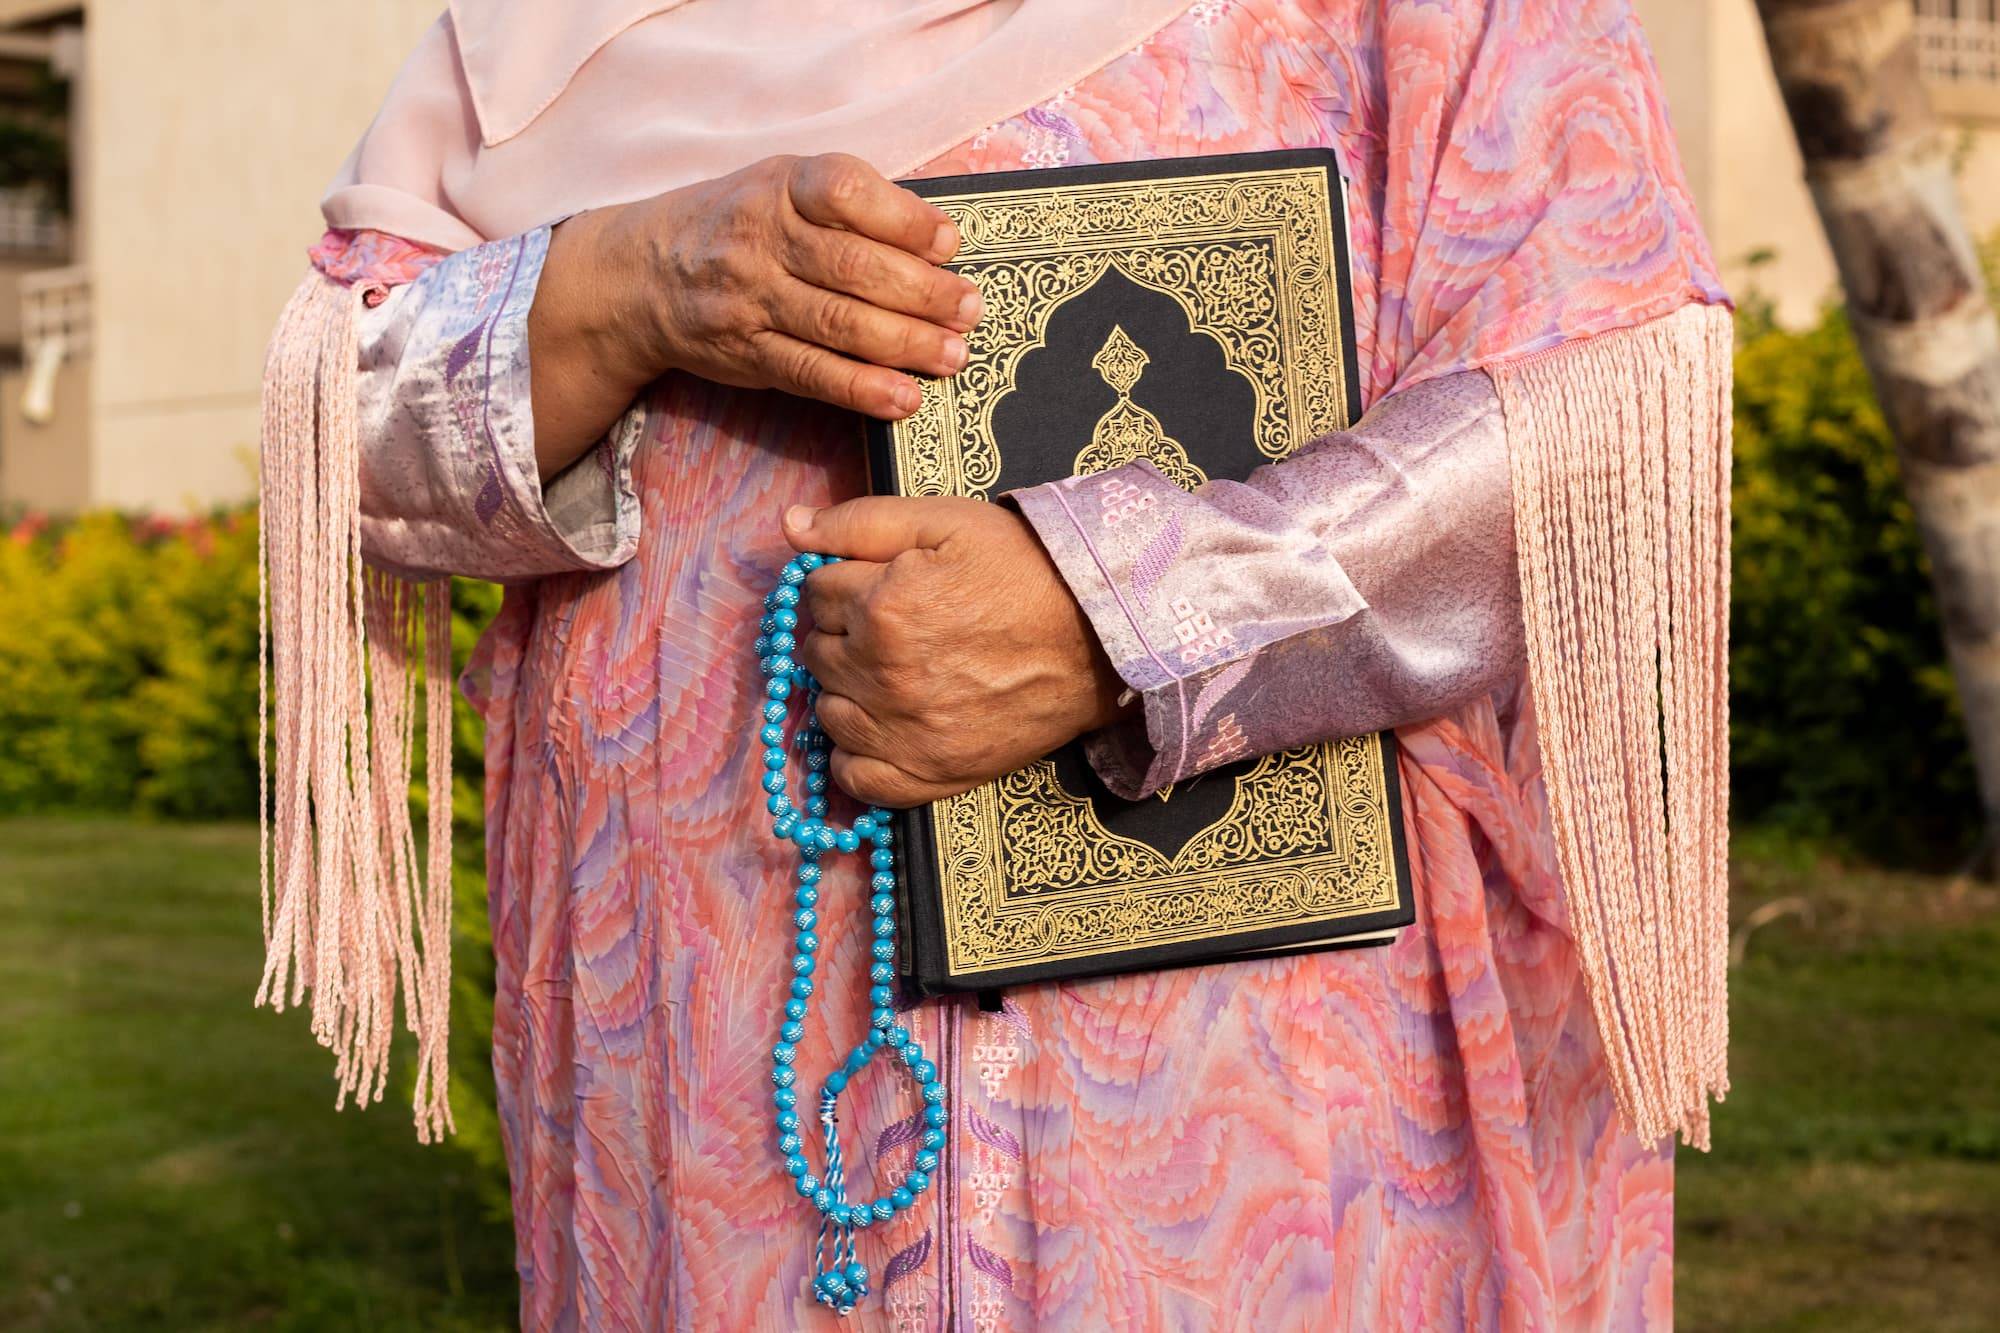 Elderly woman holding Quran and sebha (prayer beads) on Eid while wearing a festive Eid outfit.